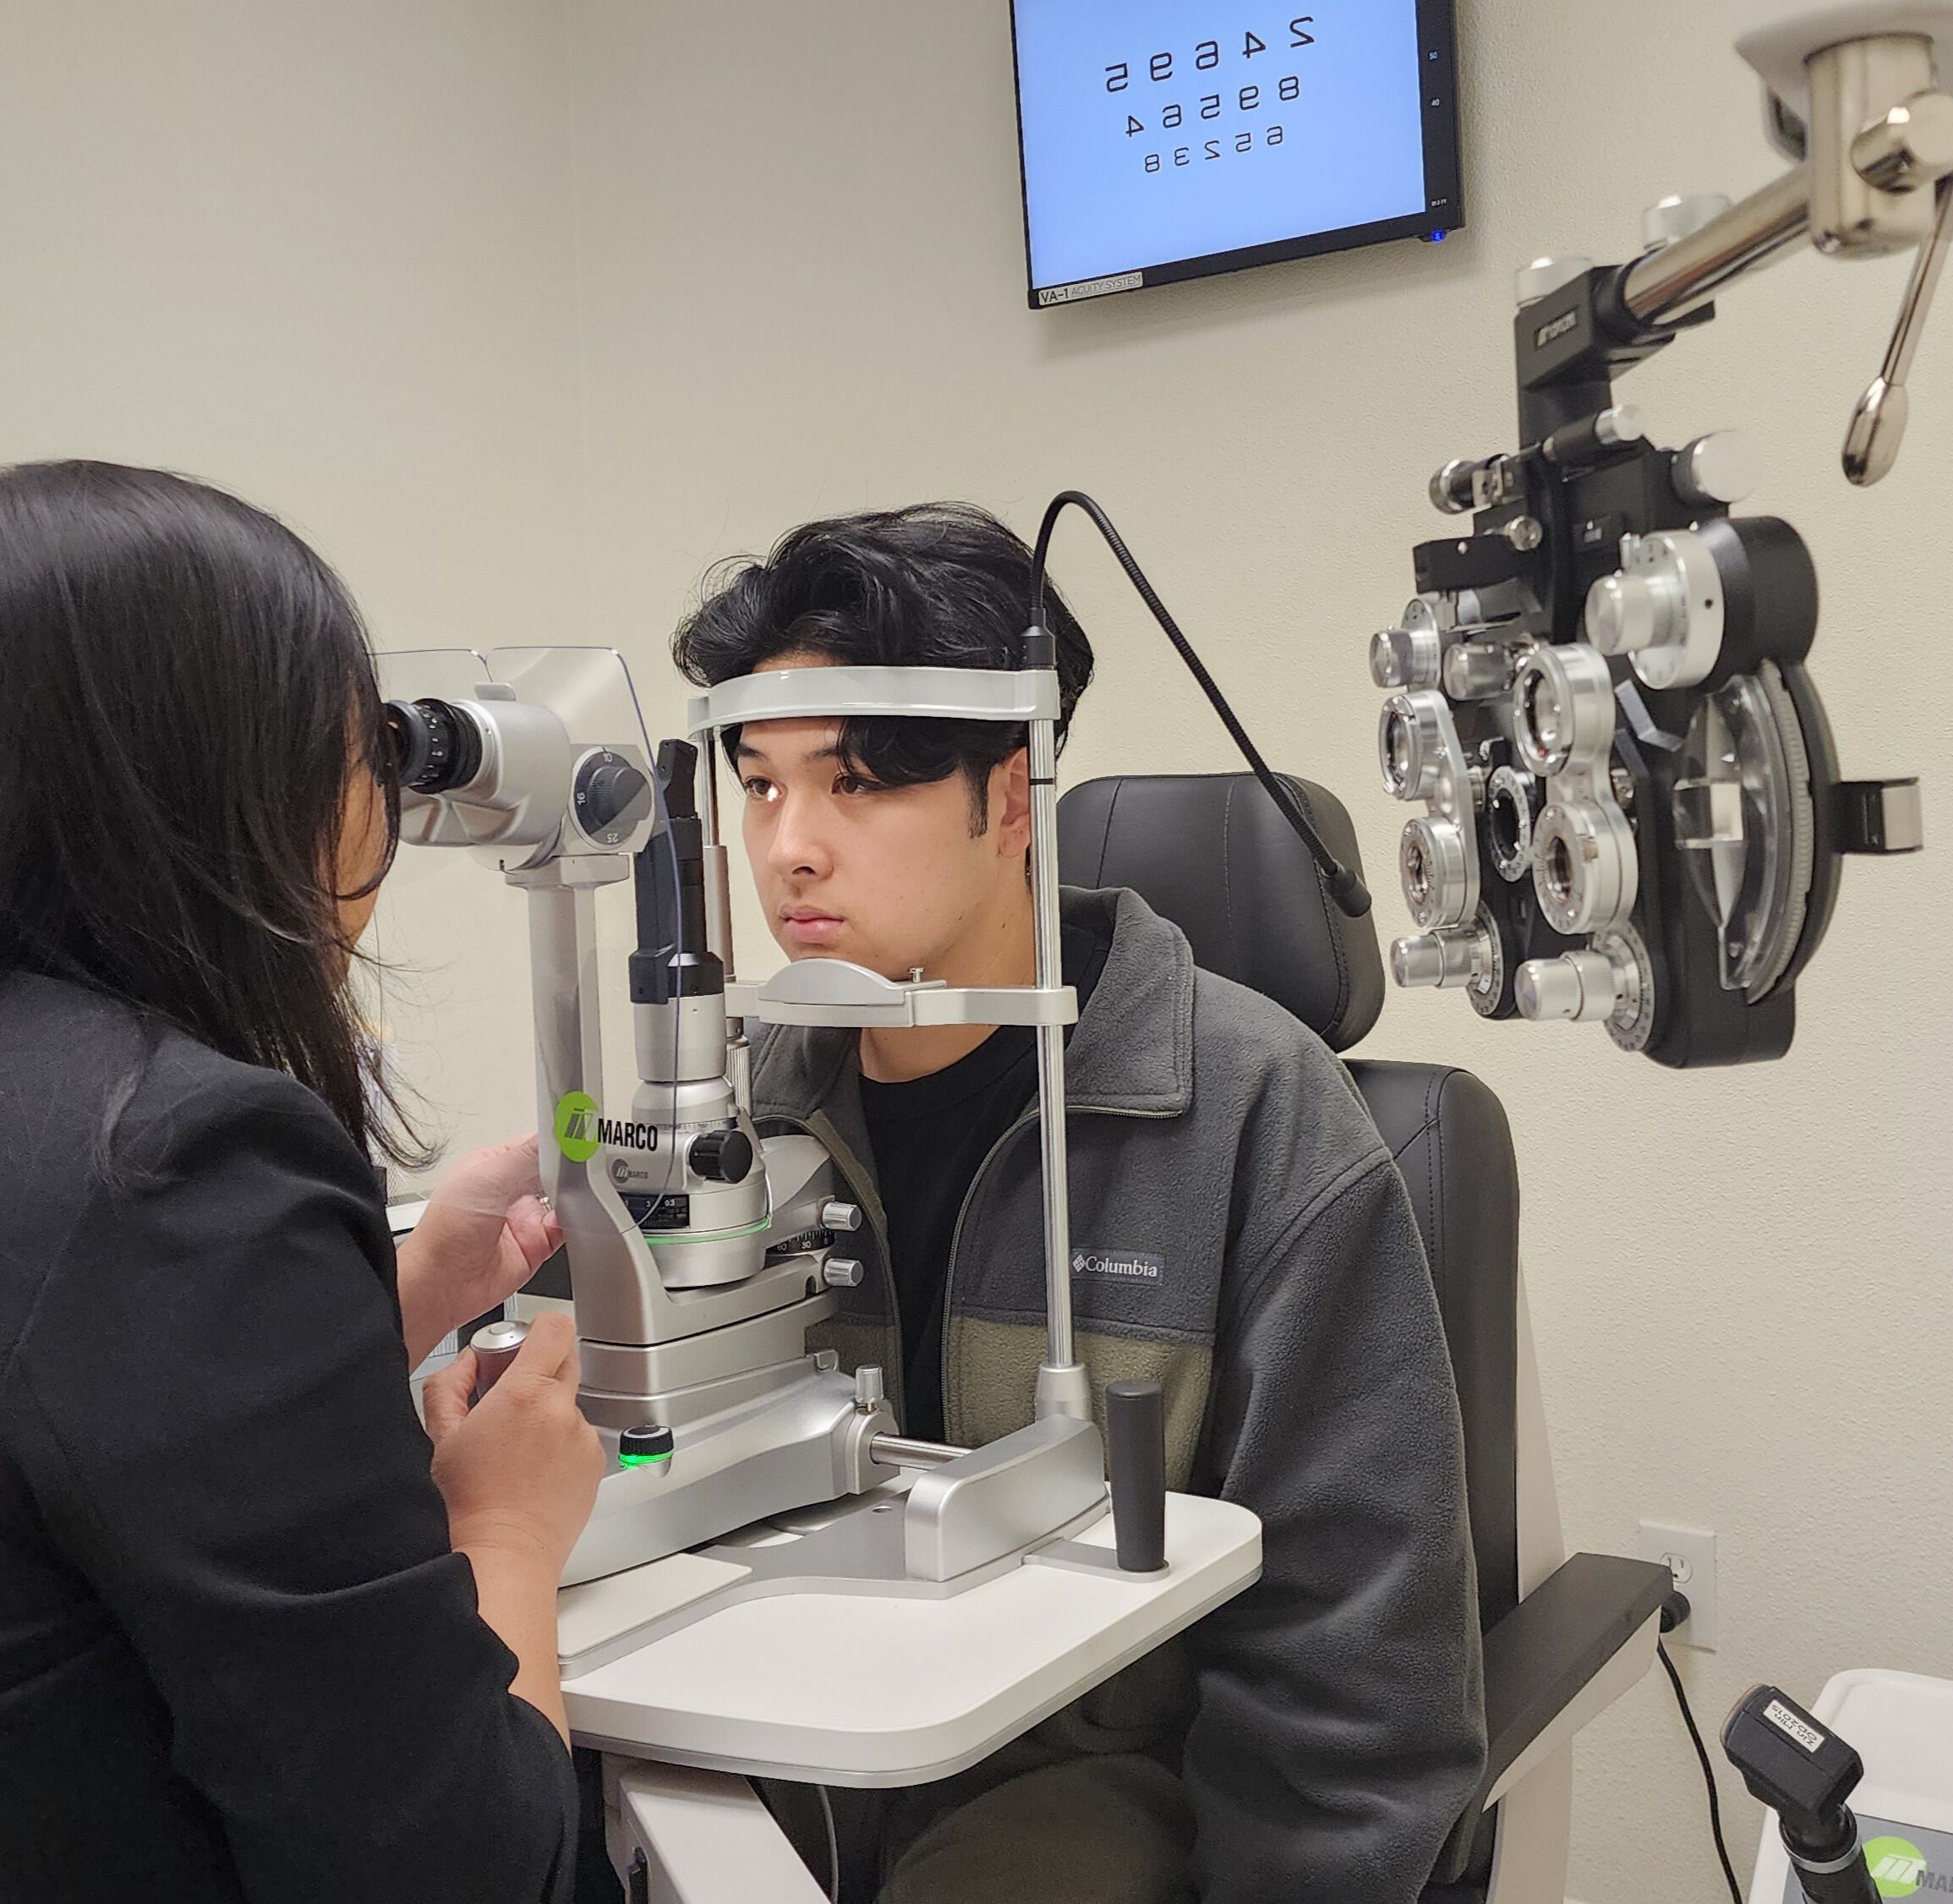 Vision Problems Detected During Eye Exams